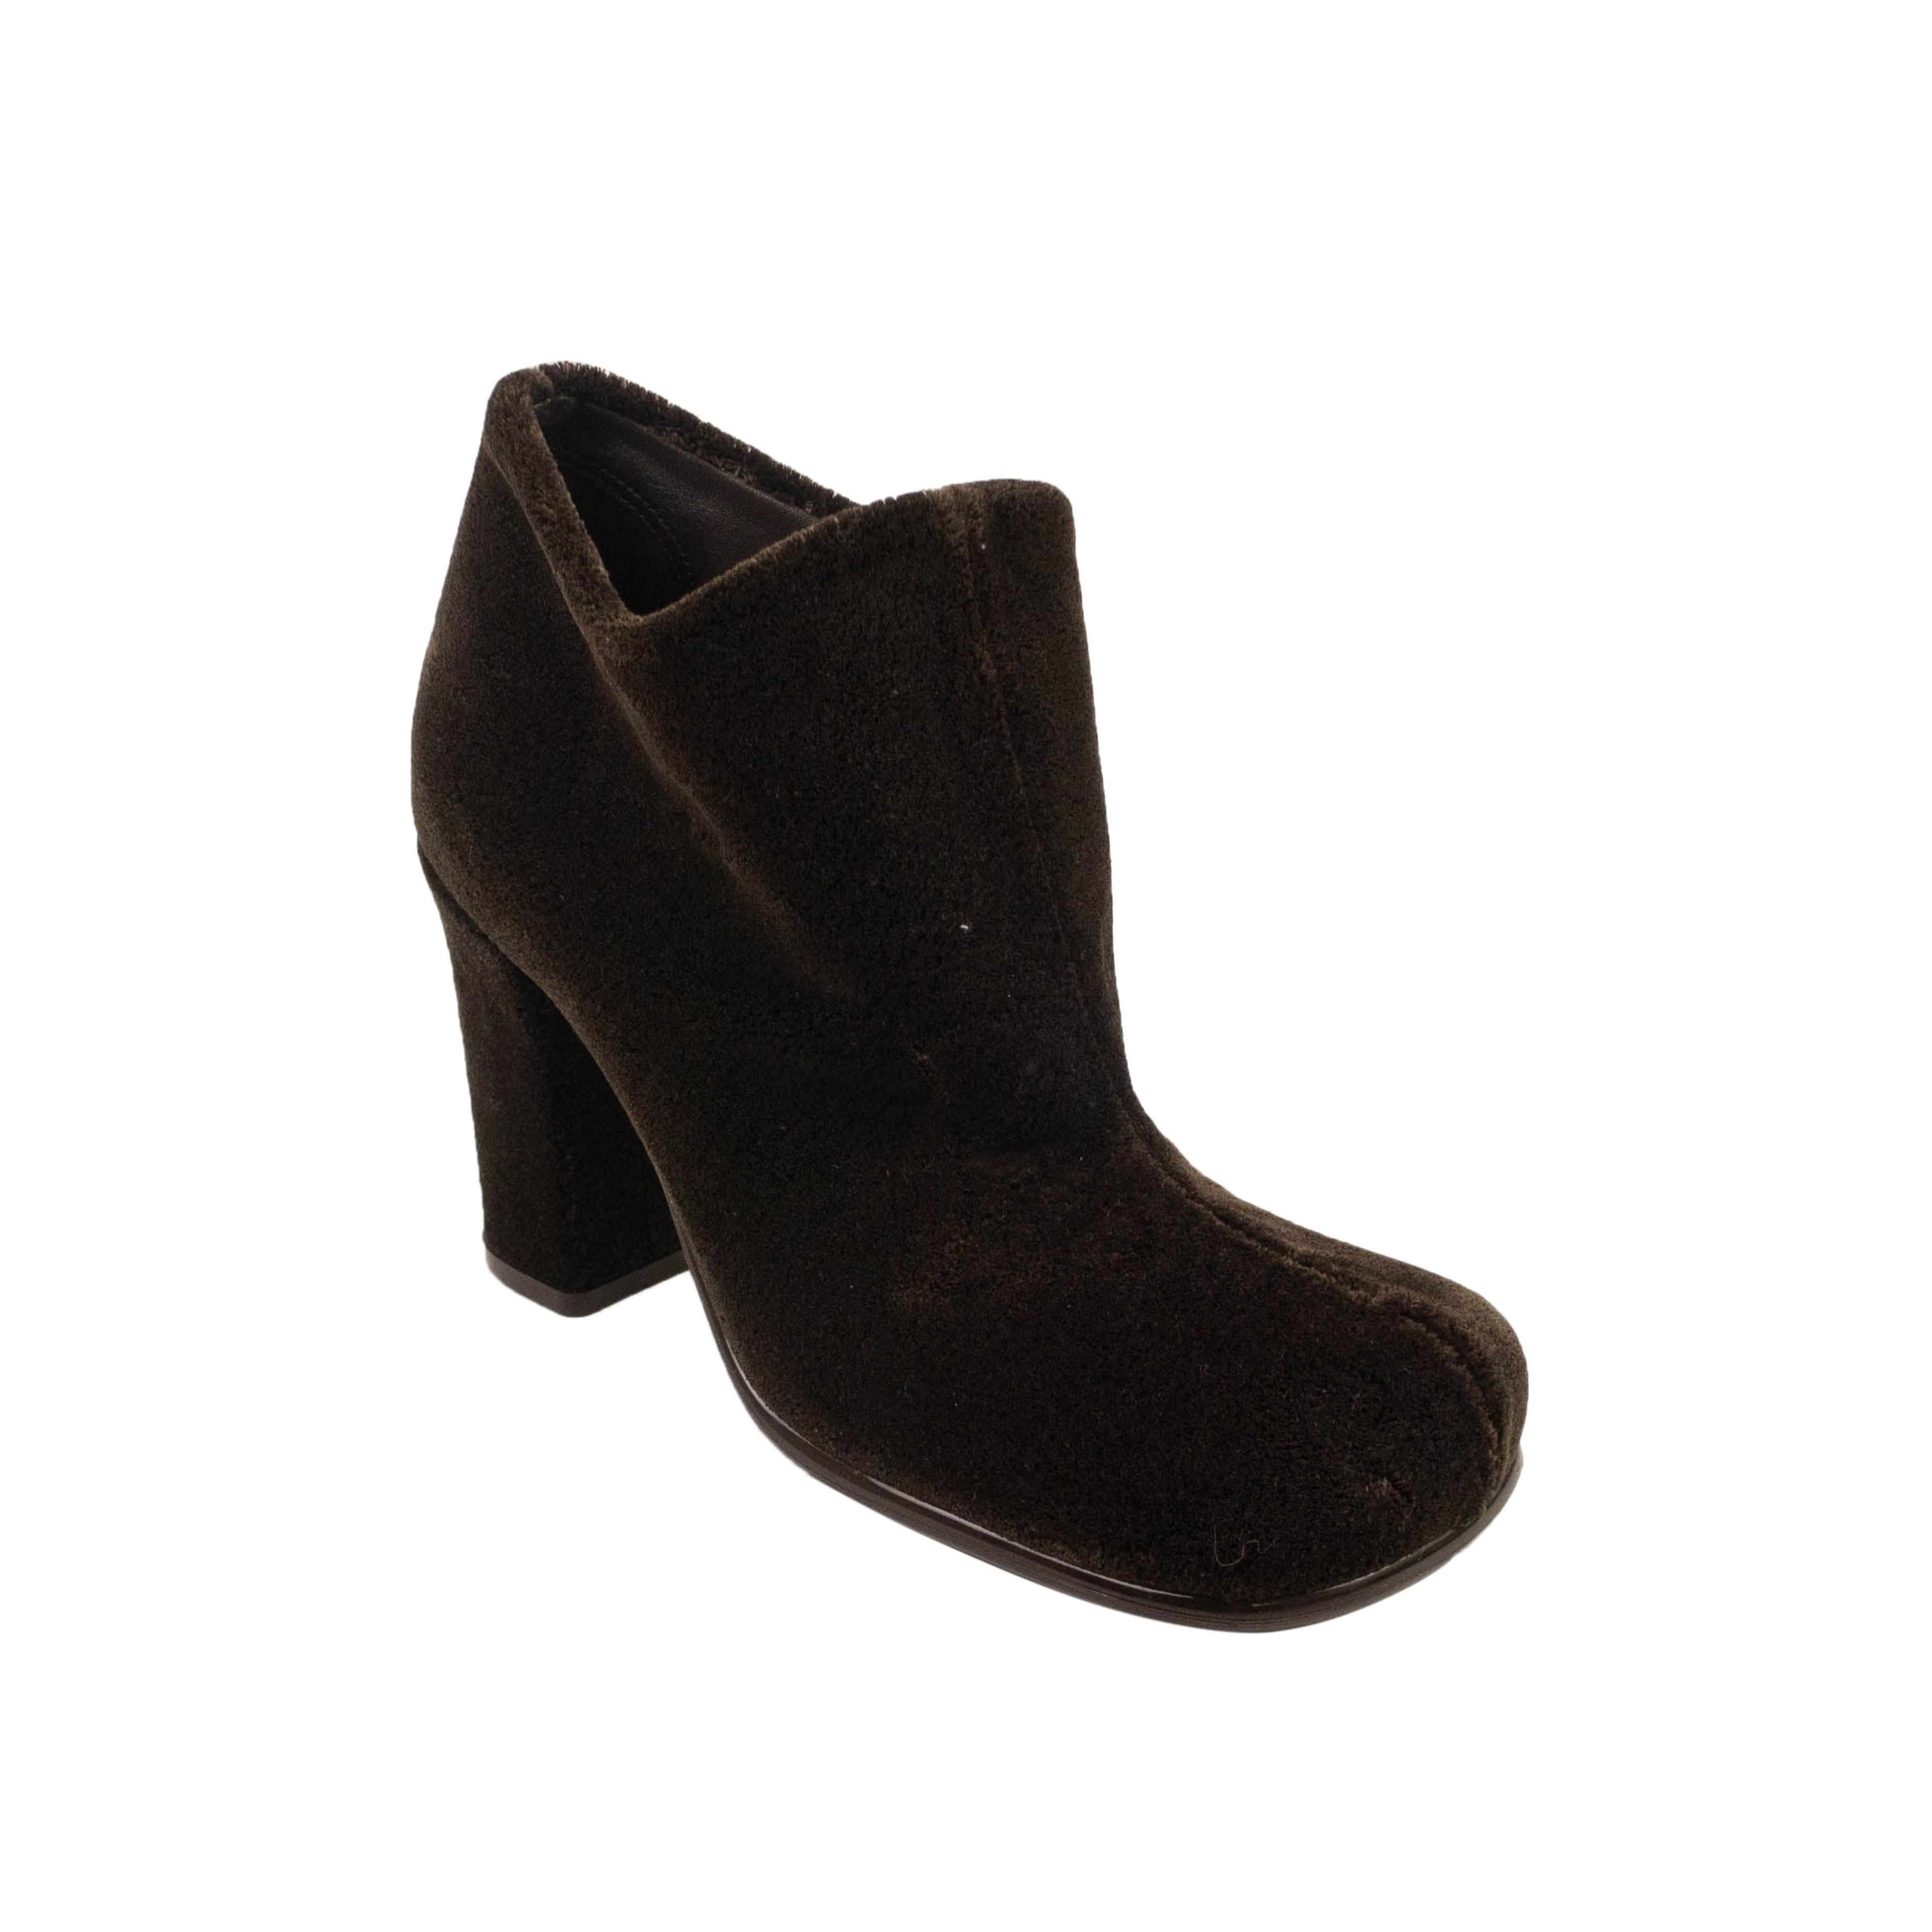 Alternate View 1 of Brown Suede Storm Square Toe Ankle Boots